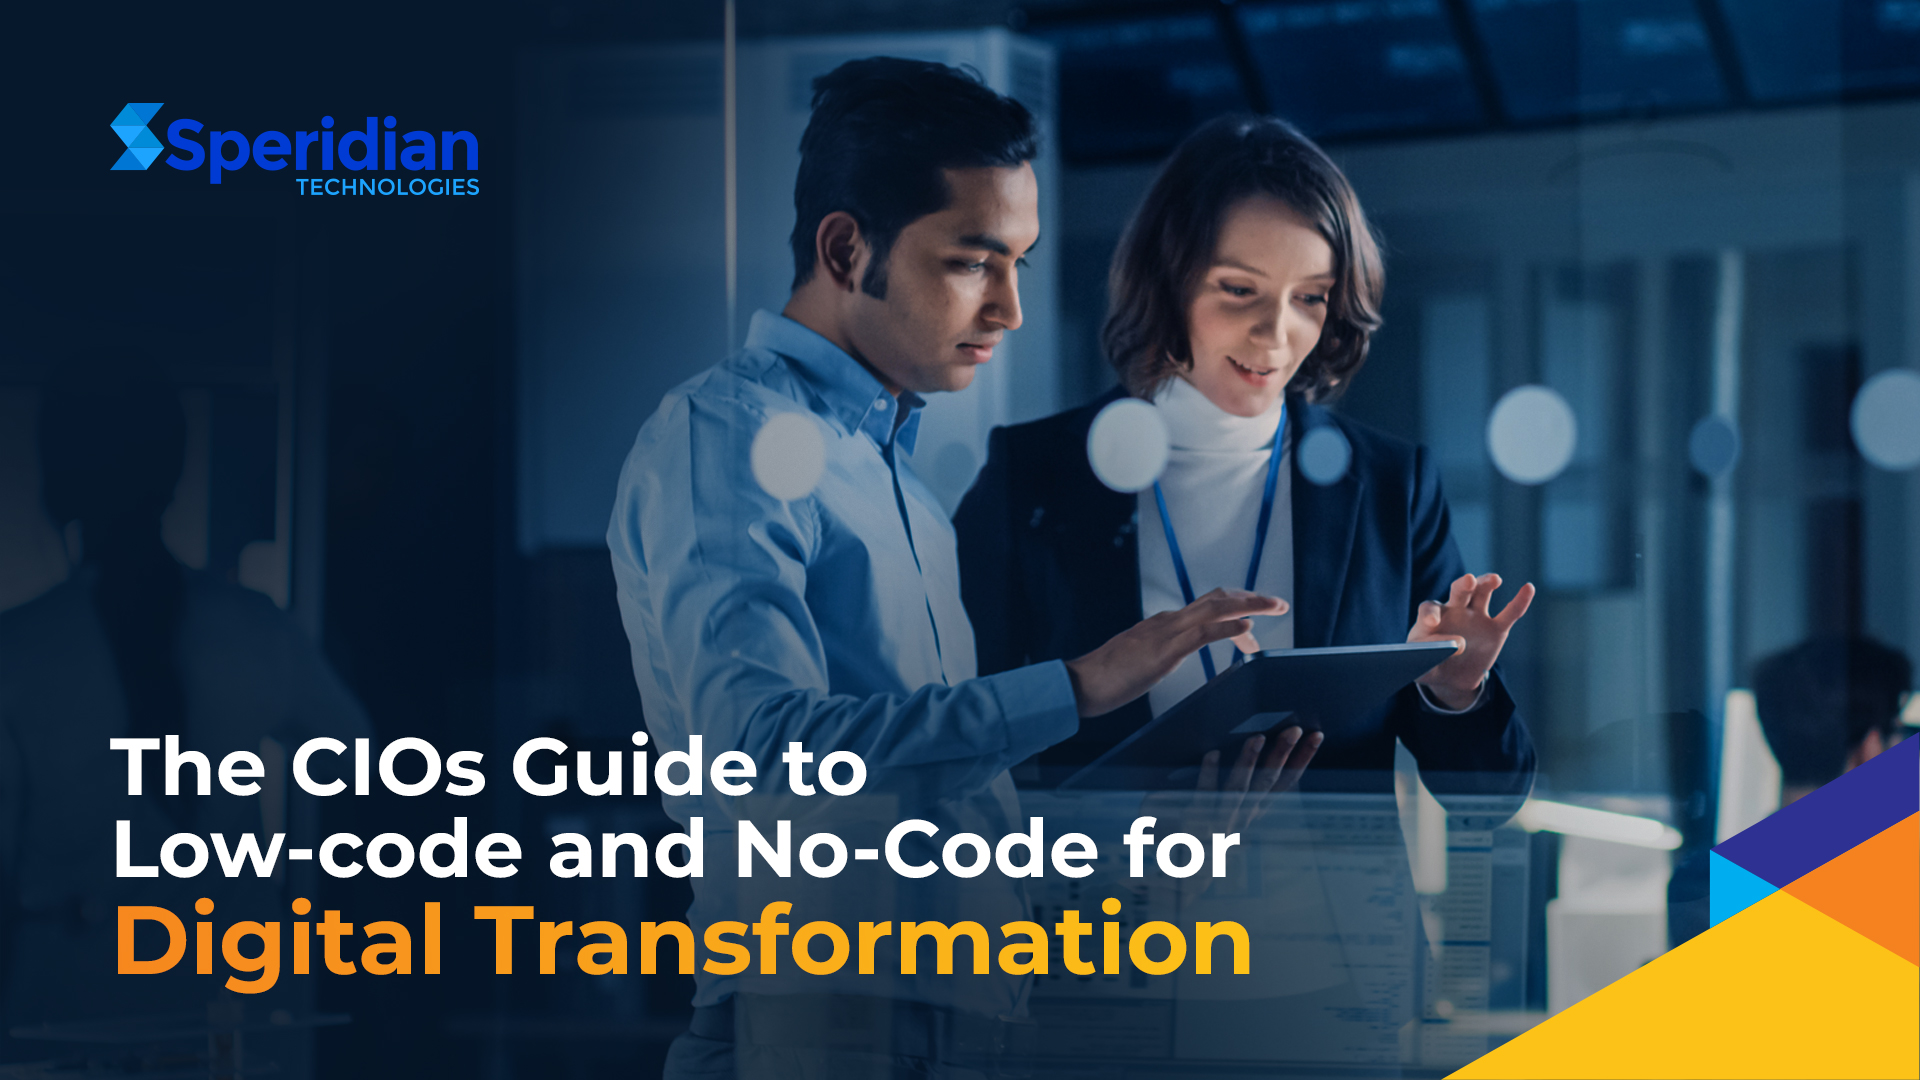 The CIOs Guide to Low-code and No-Code for Digital Transformation